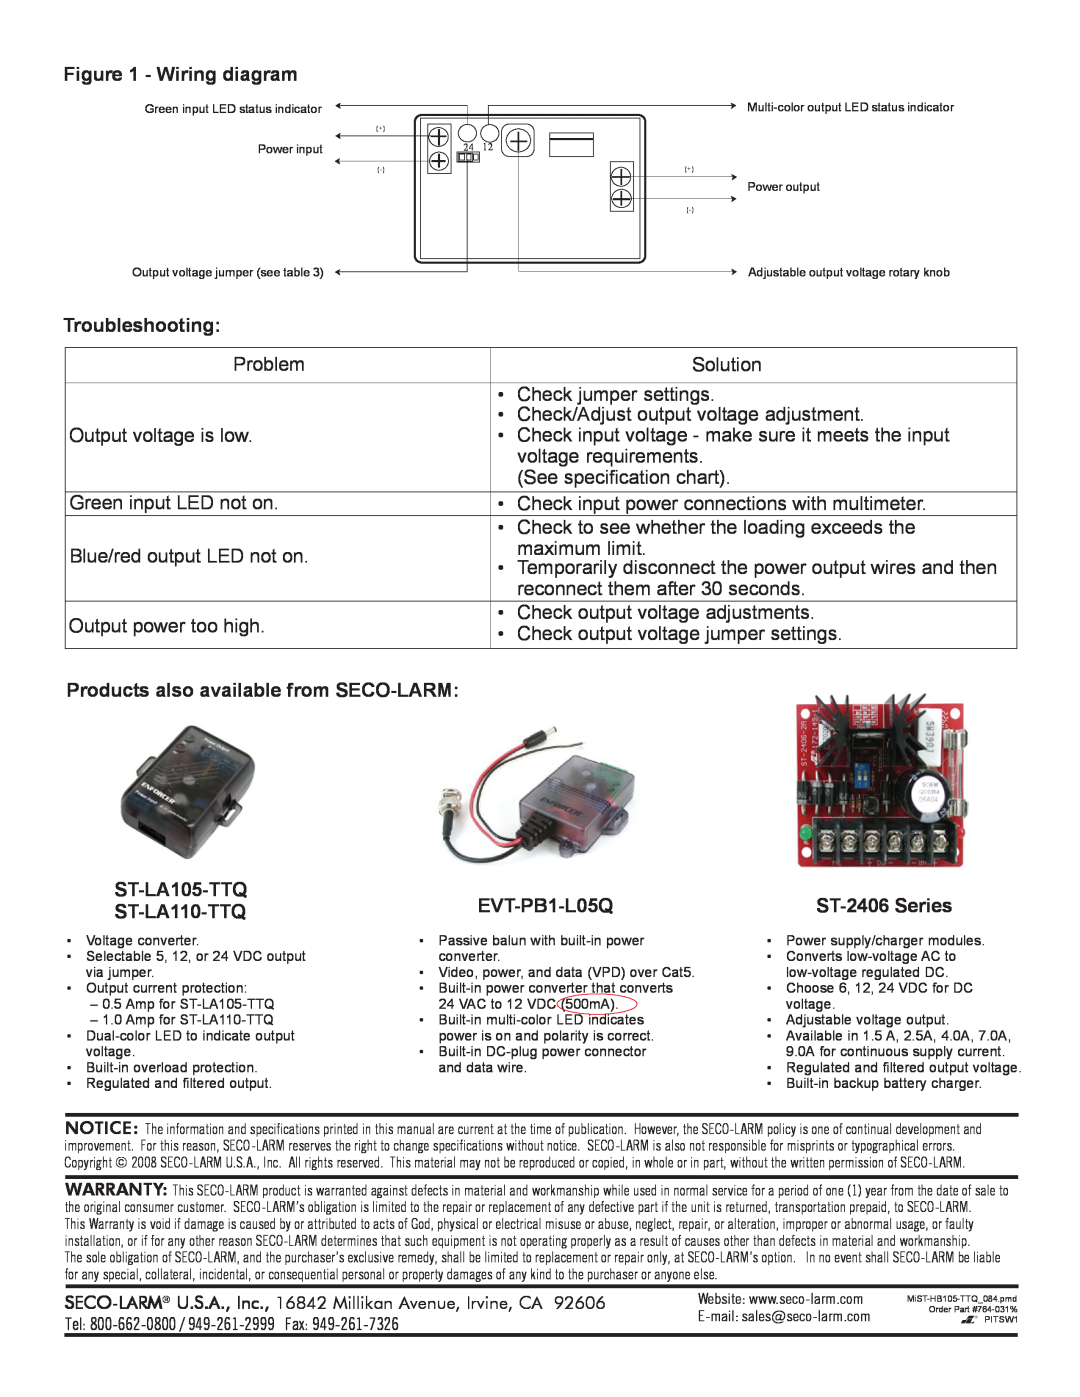 SECO-LARM USA ST-HB105-TTQ Wiring diagram, Troubleshooting, Products also available from SECO-LARM, EVT-PB1-L05Q 